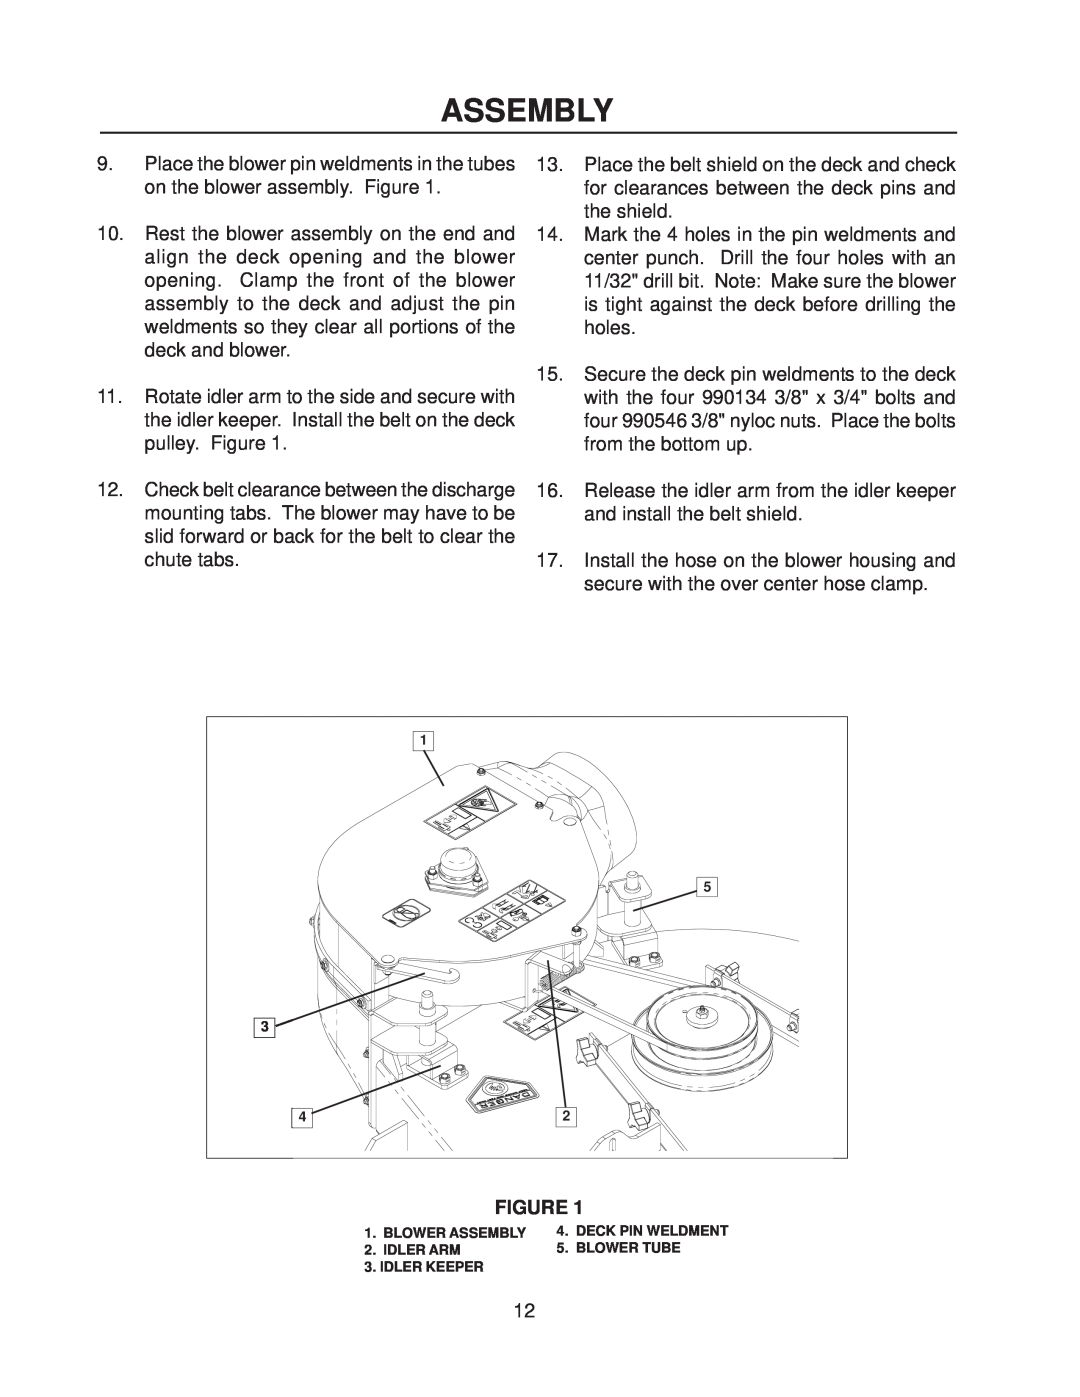 Yazoo/Kees 111793 / CS1372 manual Assembly, Place the blower pin weldments in the tubes on the blower assembly. Figure 